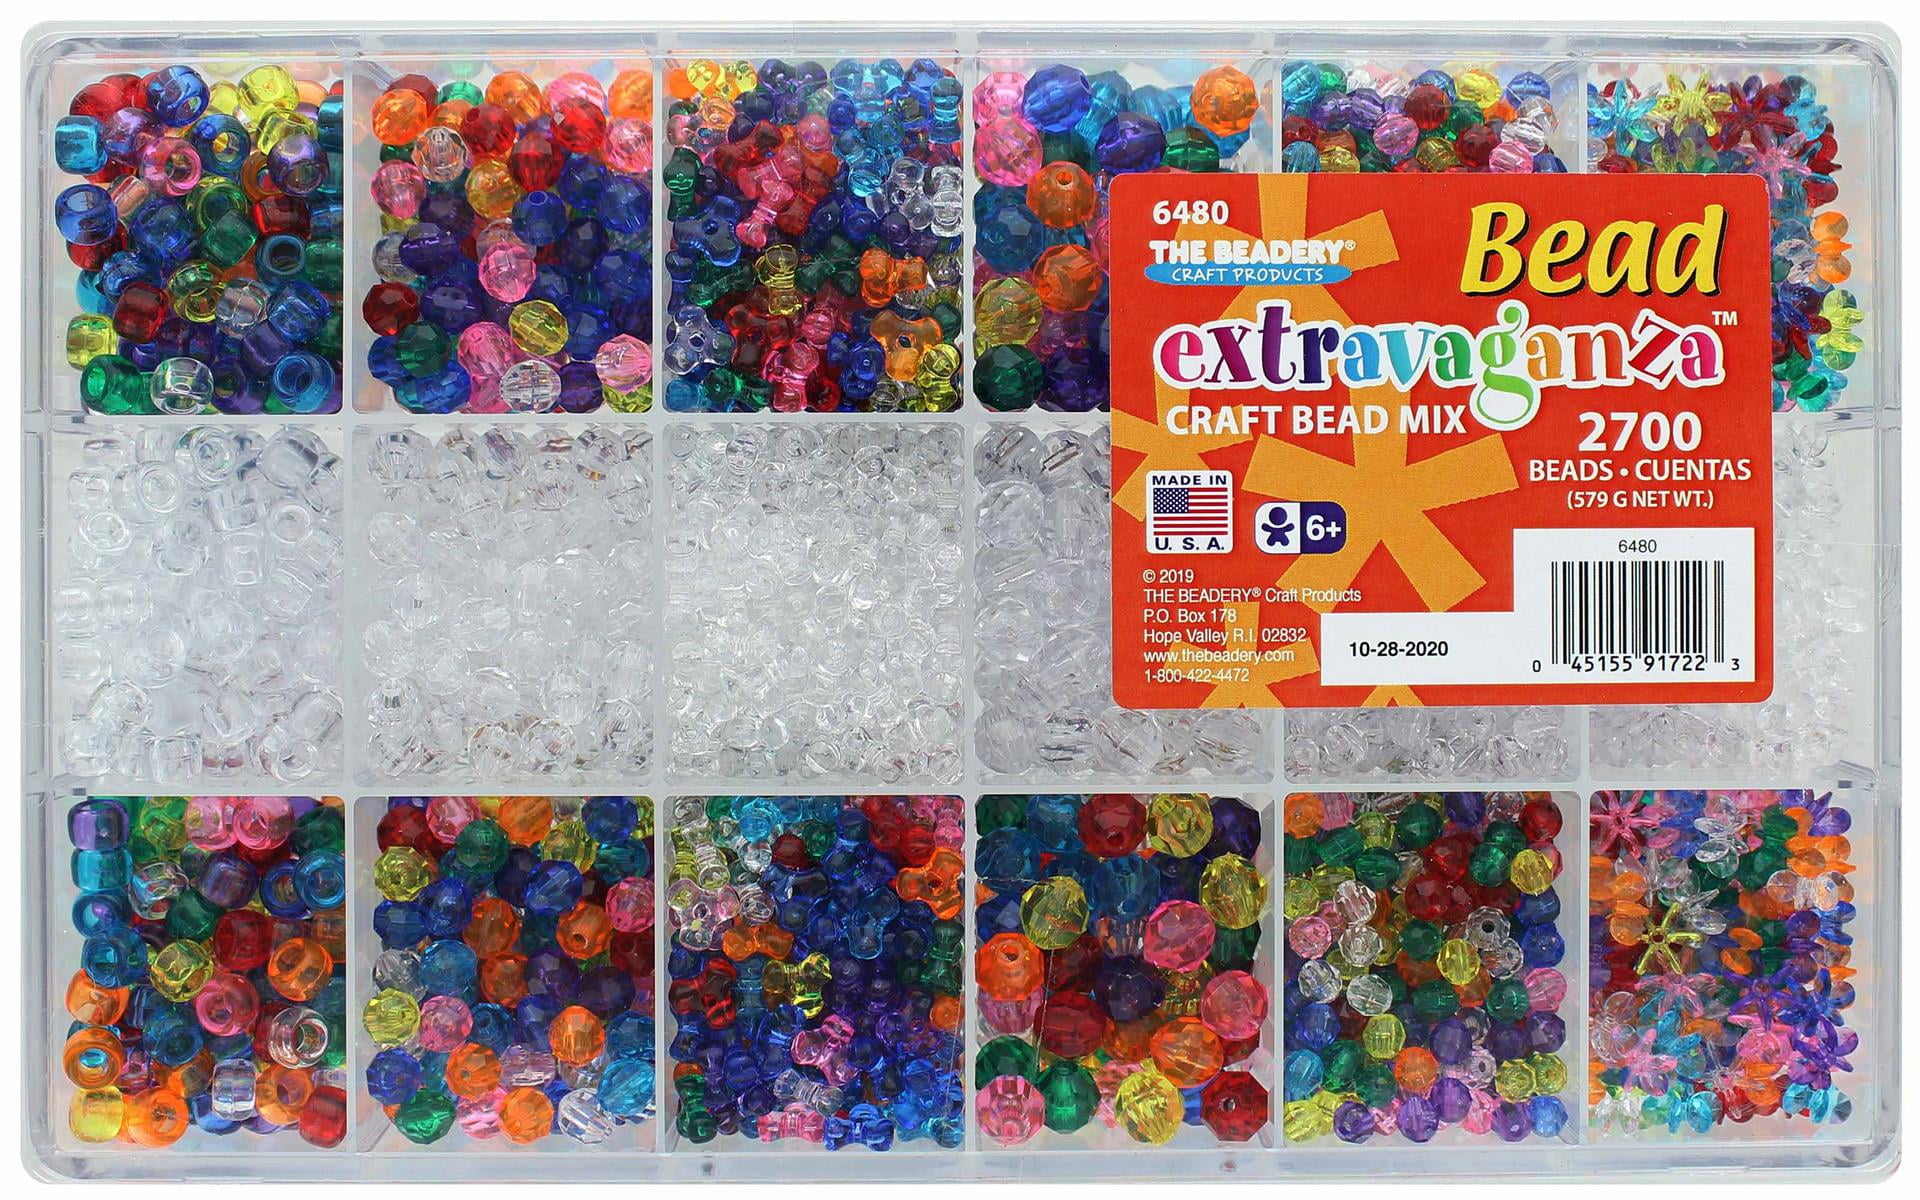 The Beadery Craft Products All Sparkle Giant Bead Box